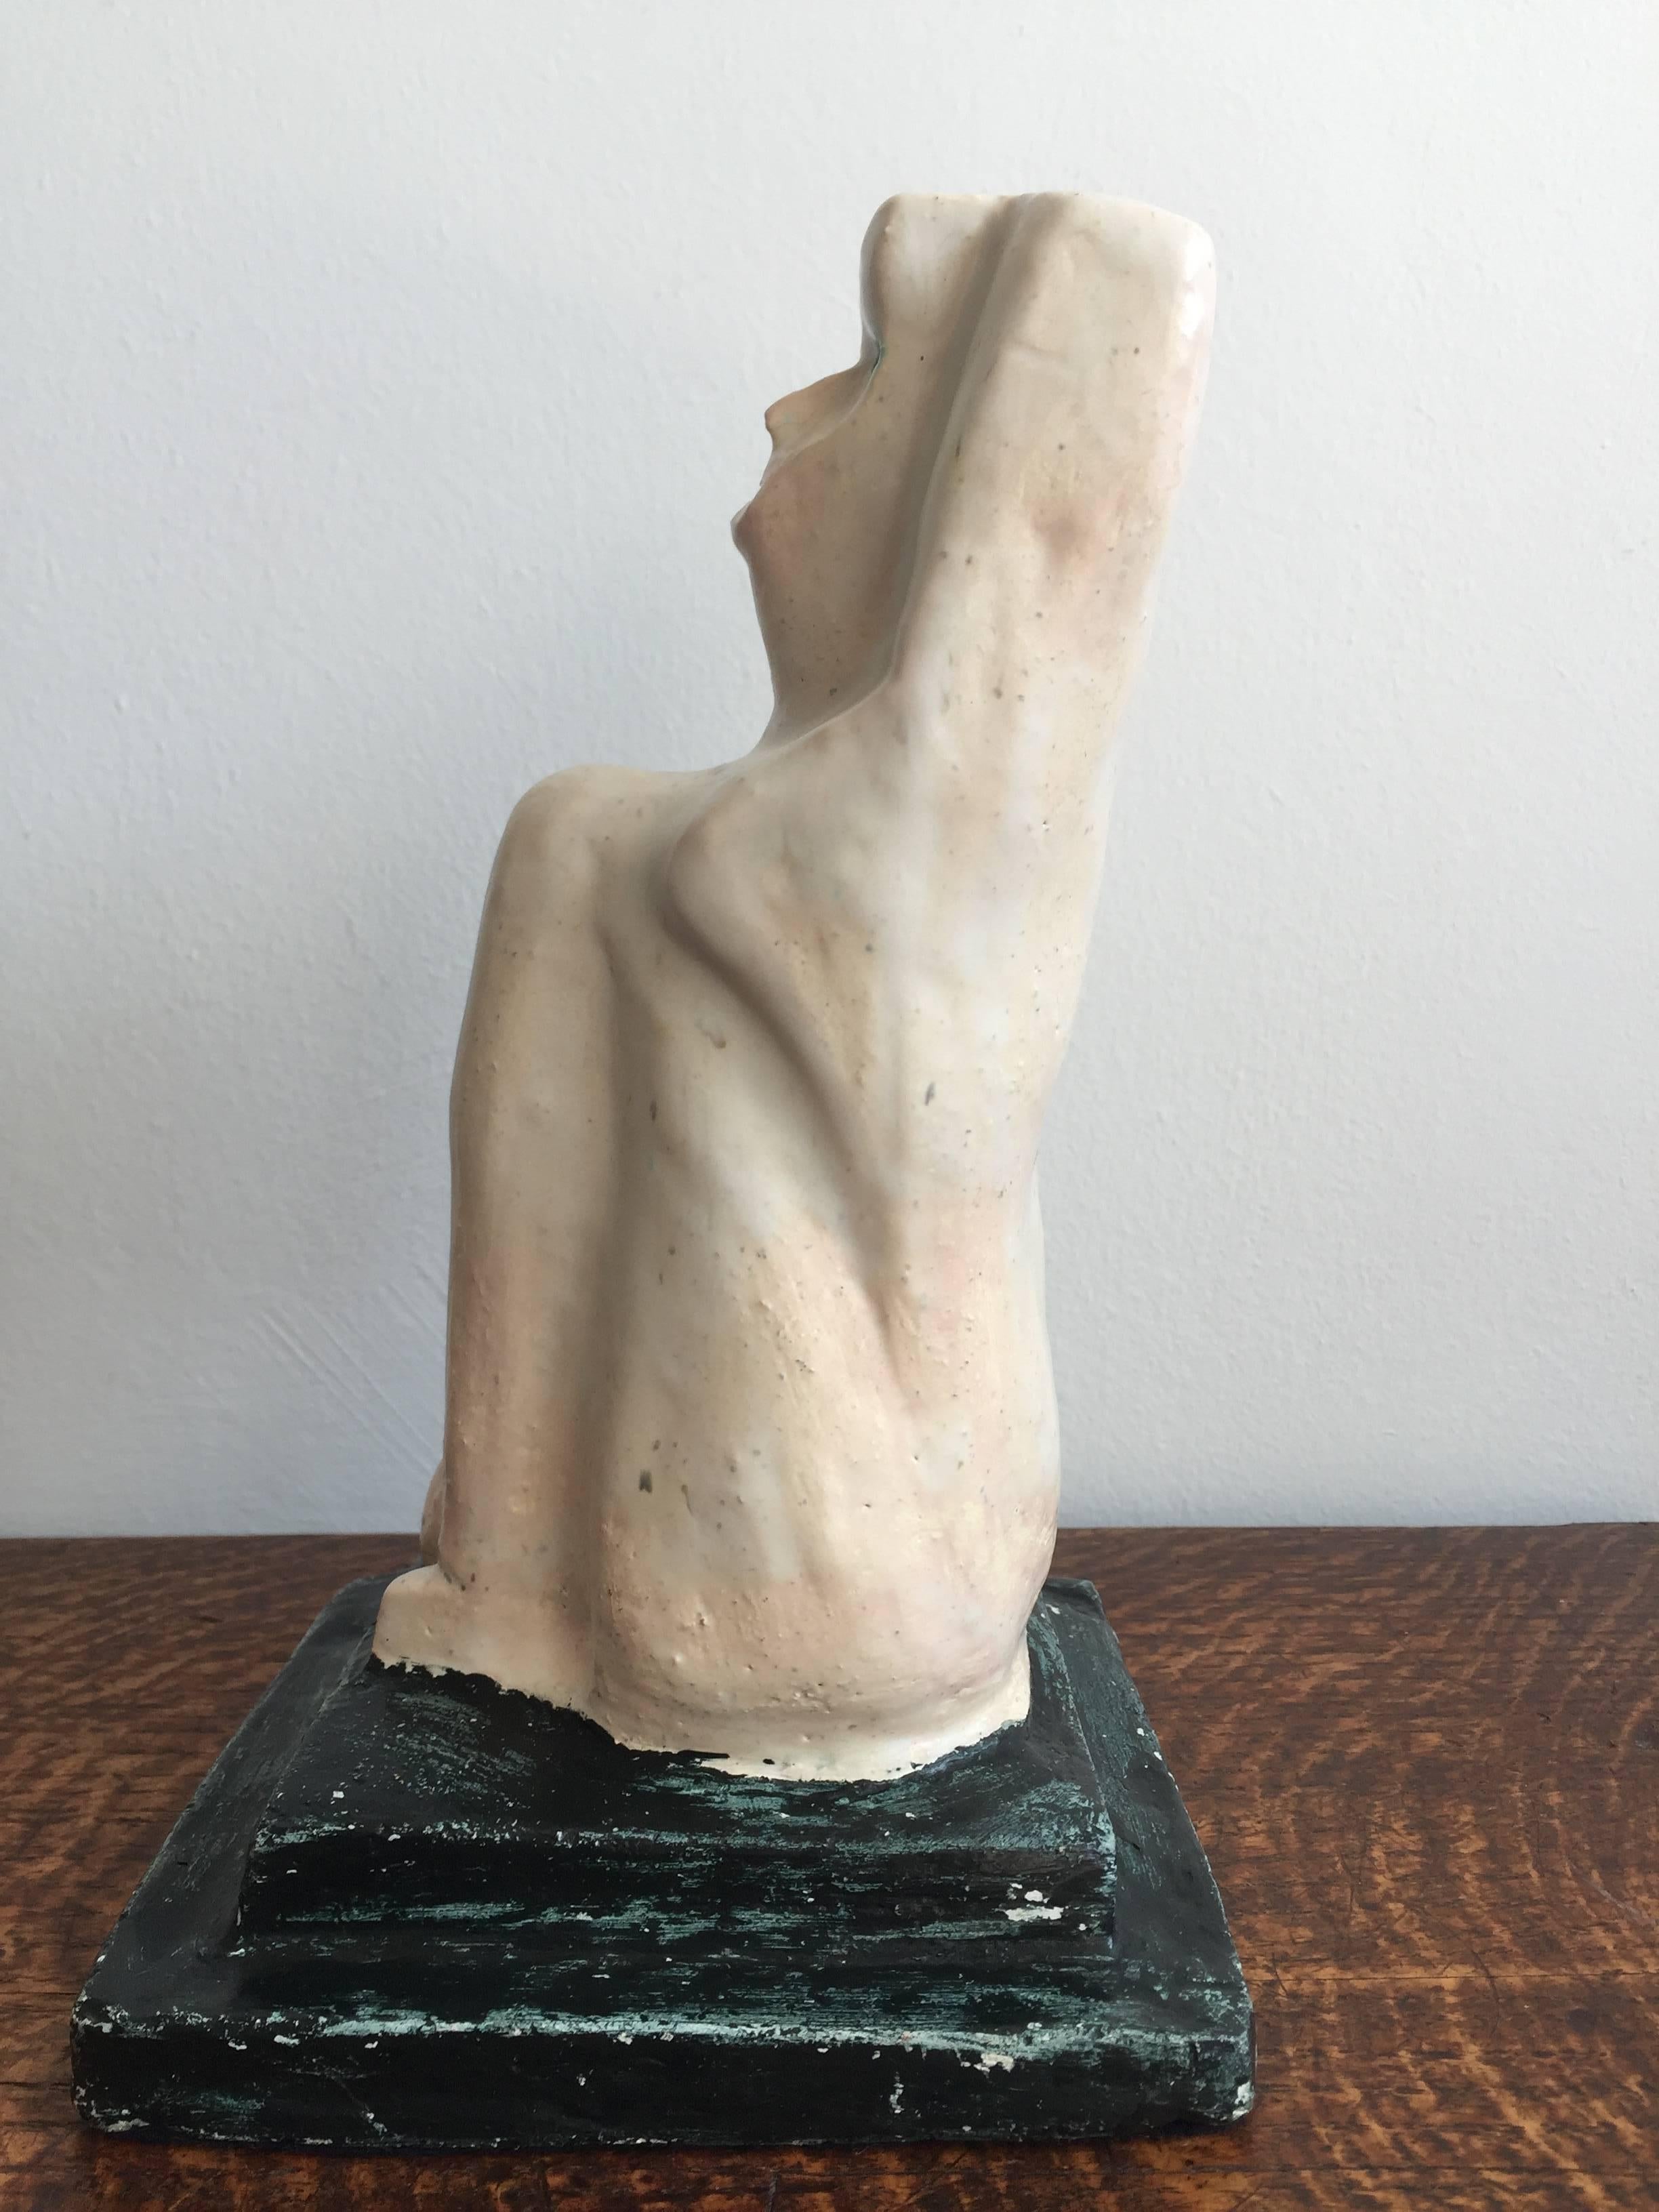 Abstracted pottery figure the torso in pink-white glaze the base in unfired green paint. Dates to circa 1940s-1950s. Signed to the base "Paulin". Pierre Paulin is known to have trained in Vallauris as a potter before turning to furniture